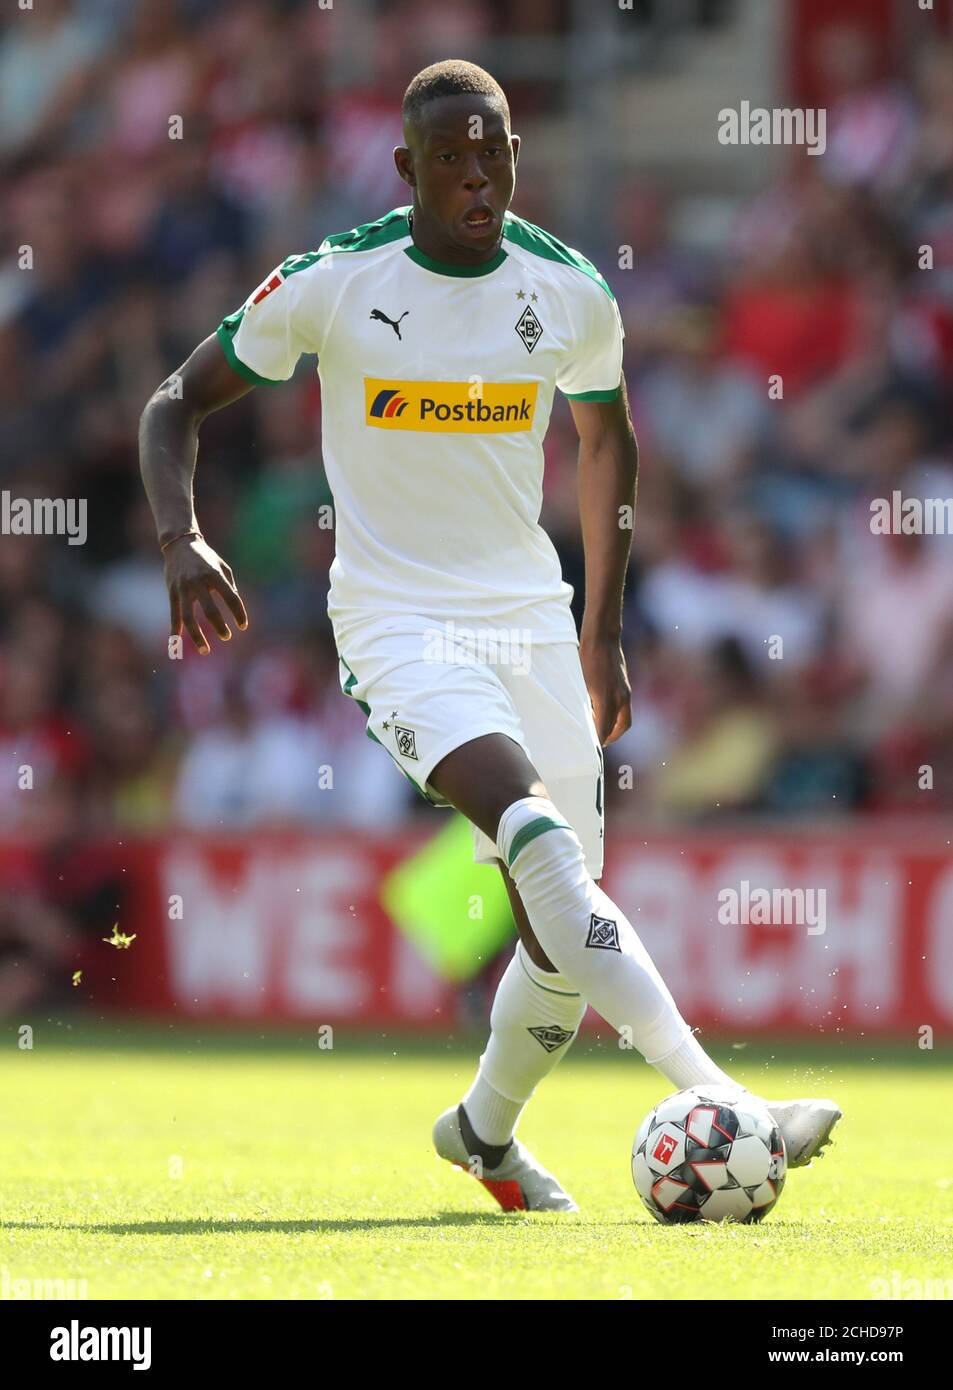 Denis Zakaria In Action On The Football Field Wallpaper